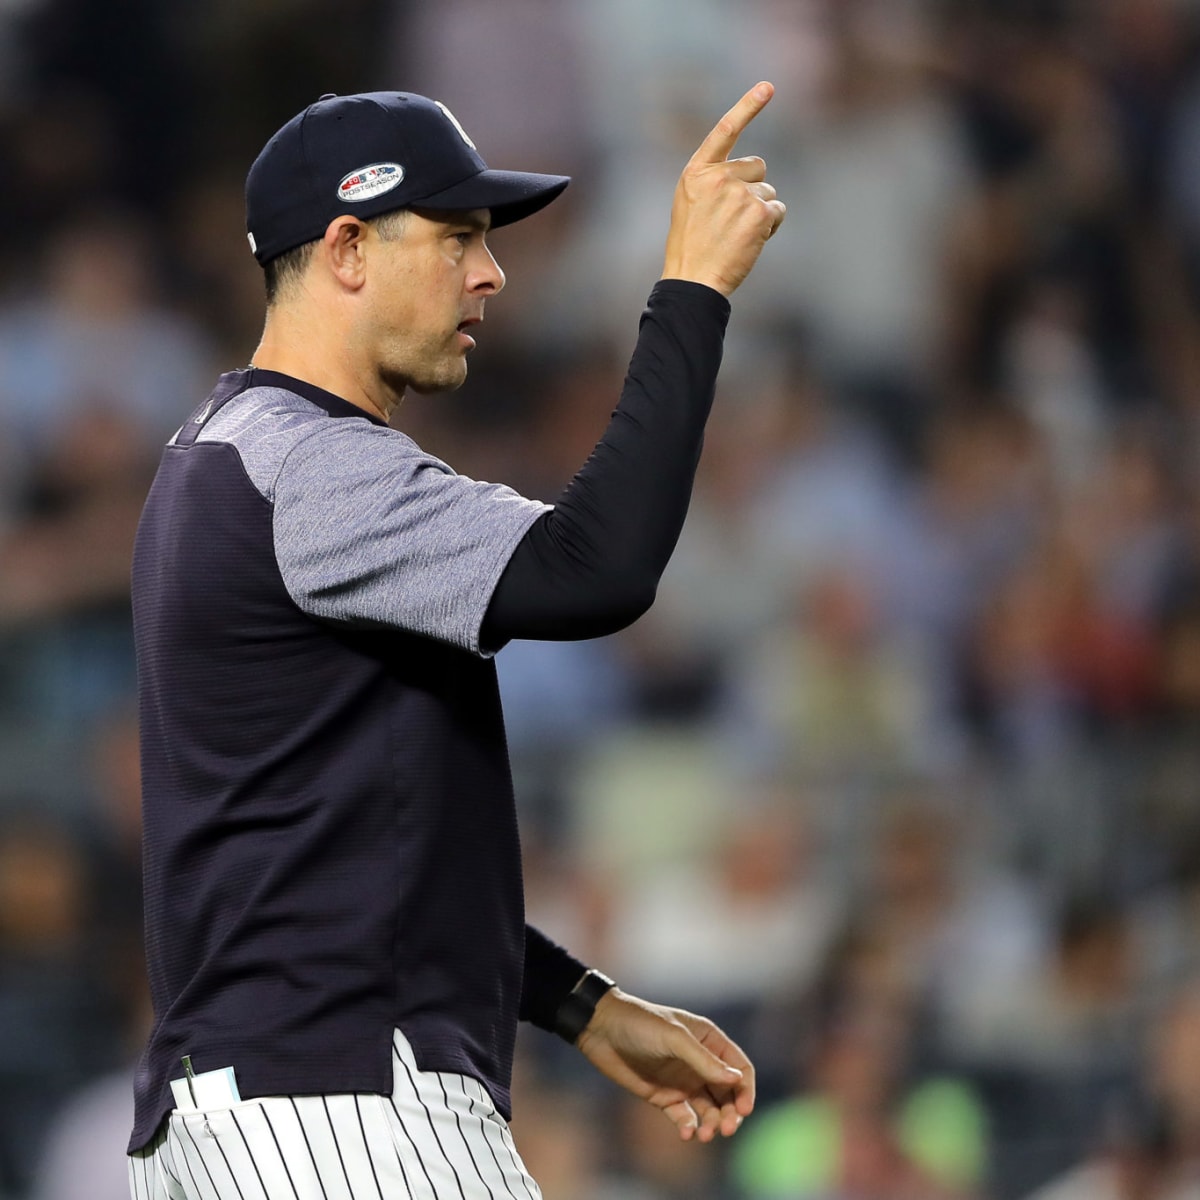 Wildest US sports ejections of all time after Aaron Boone was